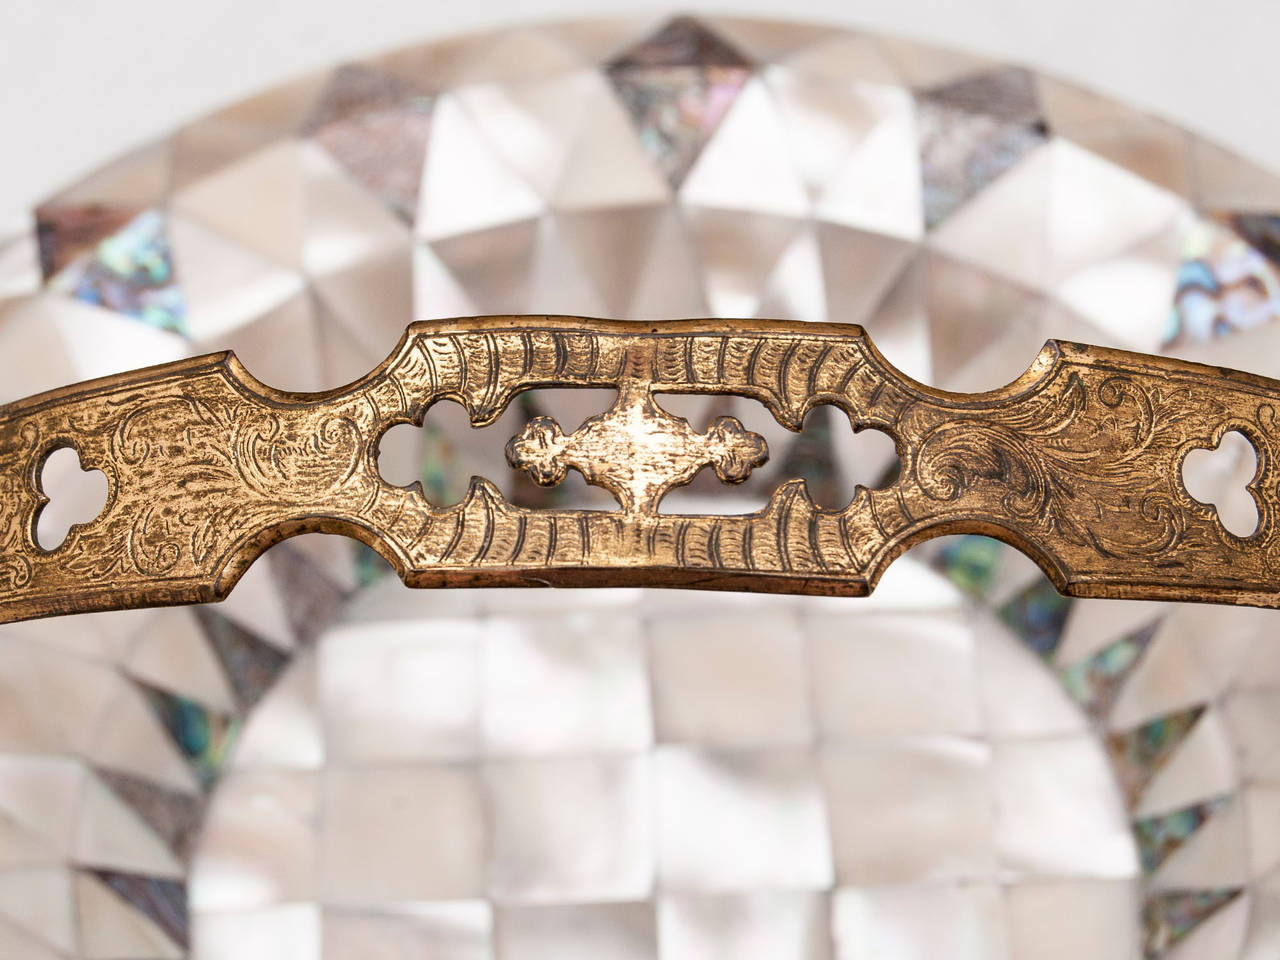 Mother of Pearl Bowl In Good Condition For Sale In Northampton, United Kingdom